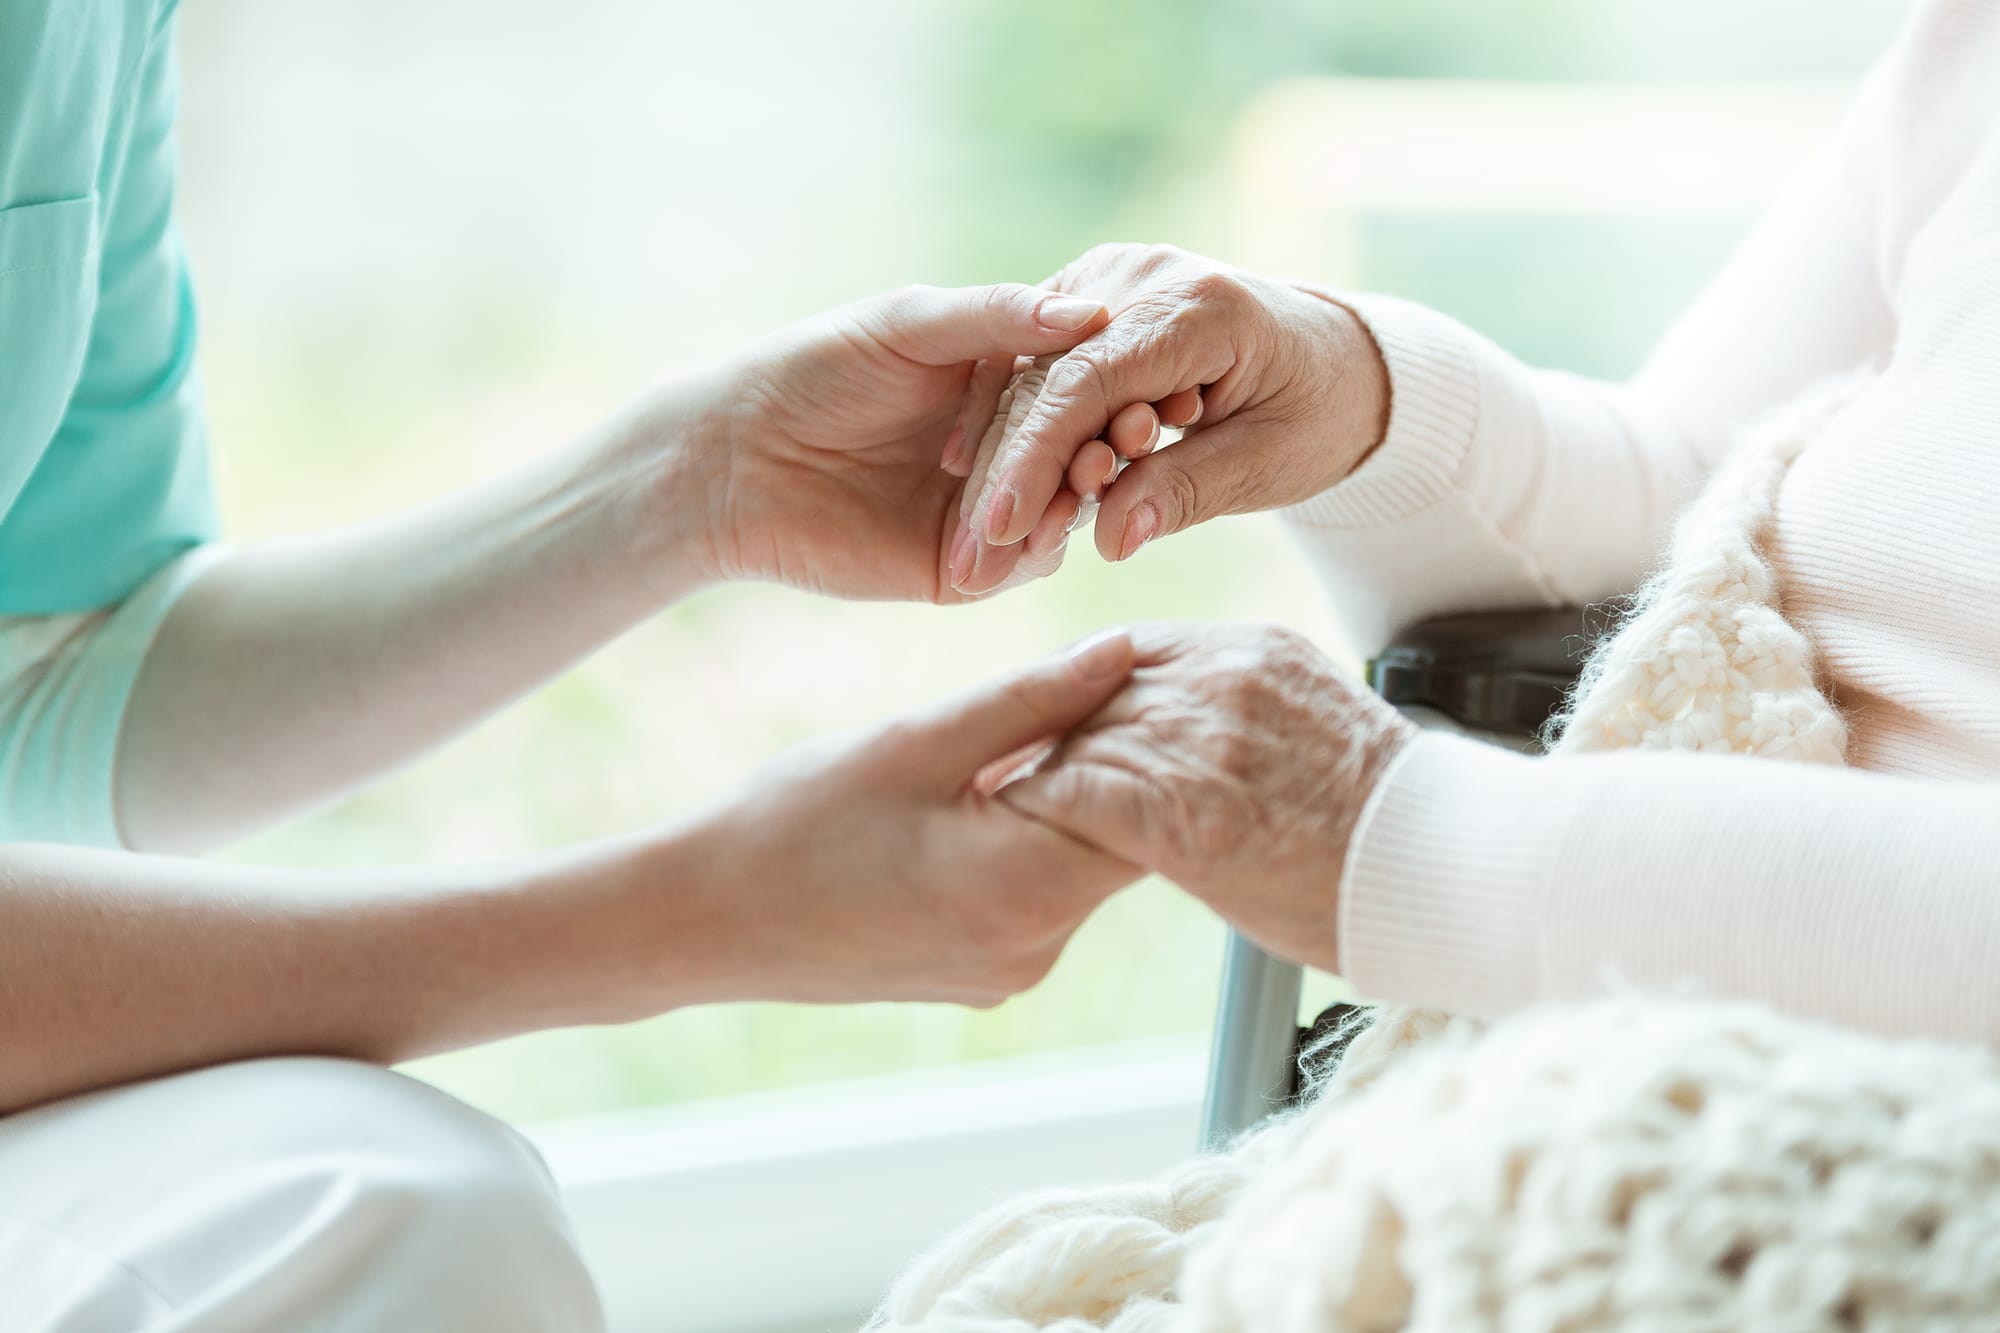 How can hospice care provide comfort to those with terminal illnesses?